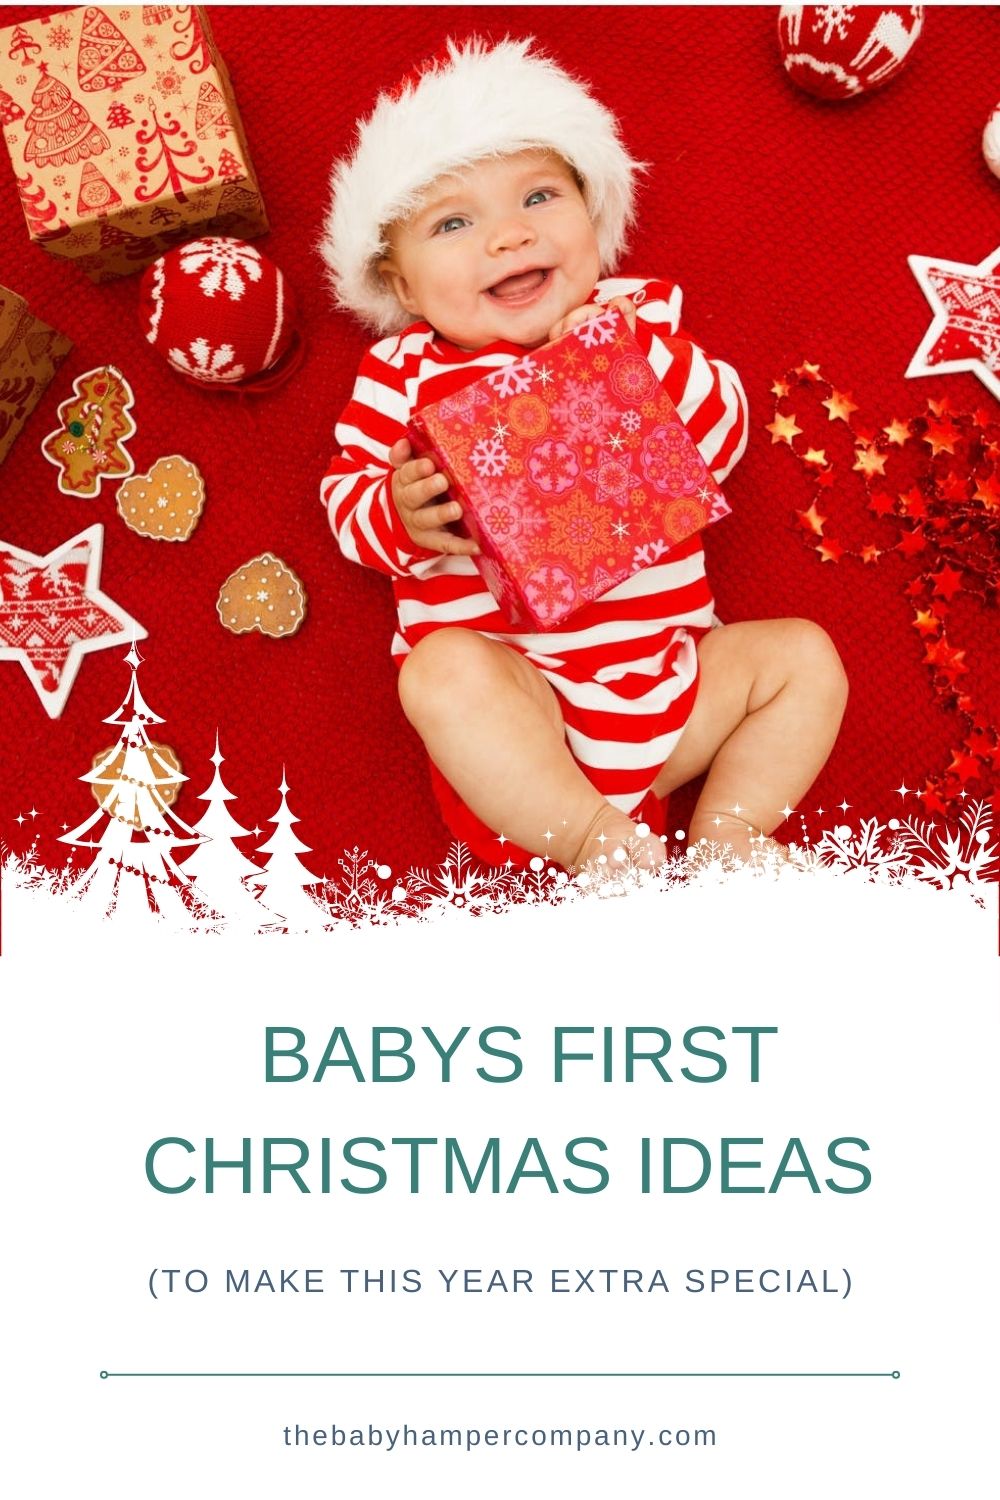 Babys First Christmas Ideas 2021